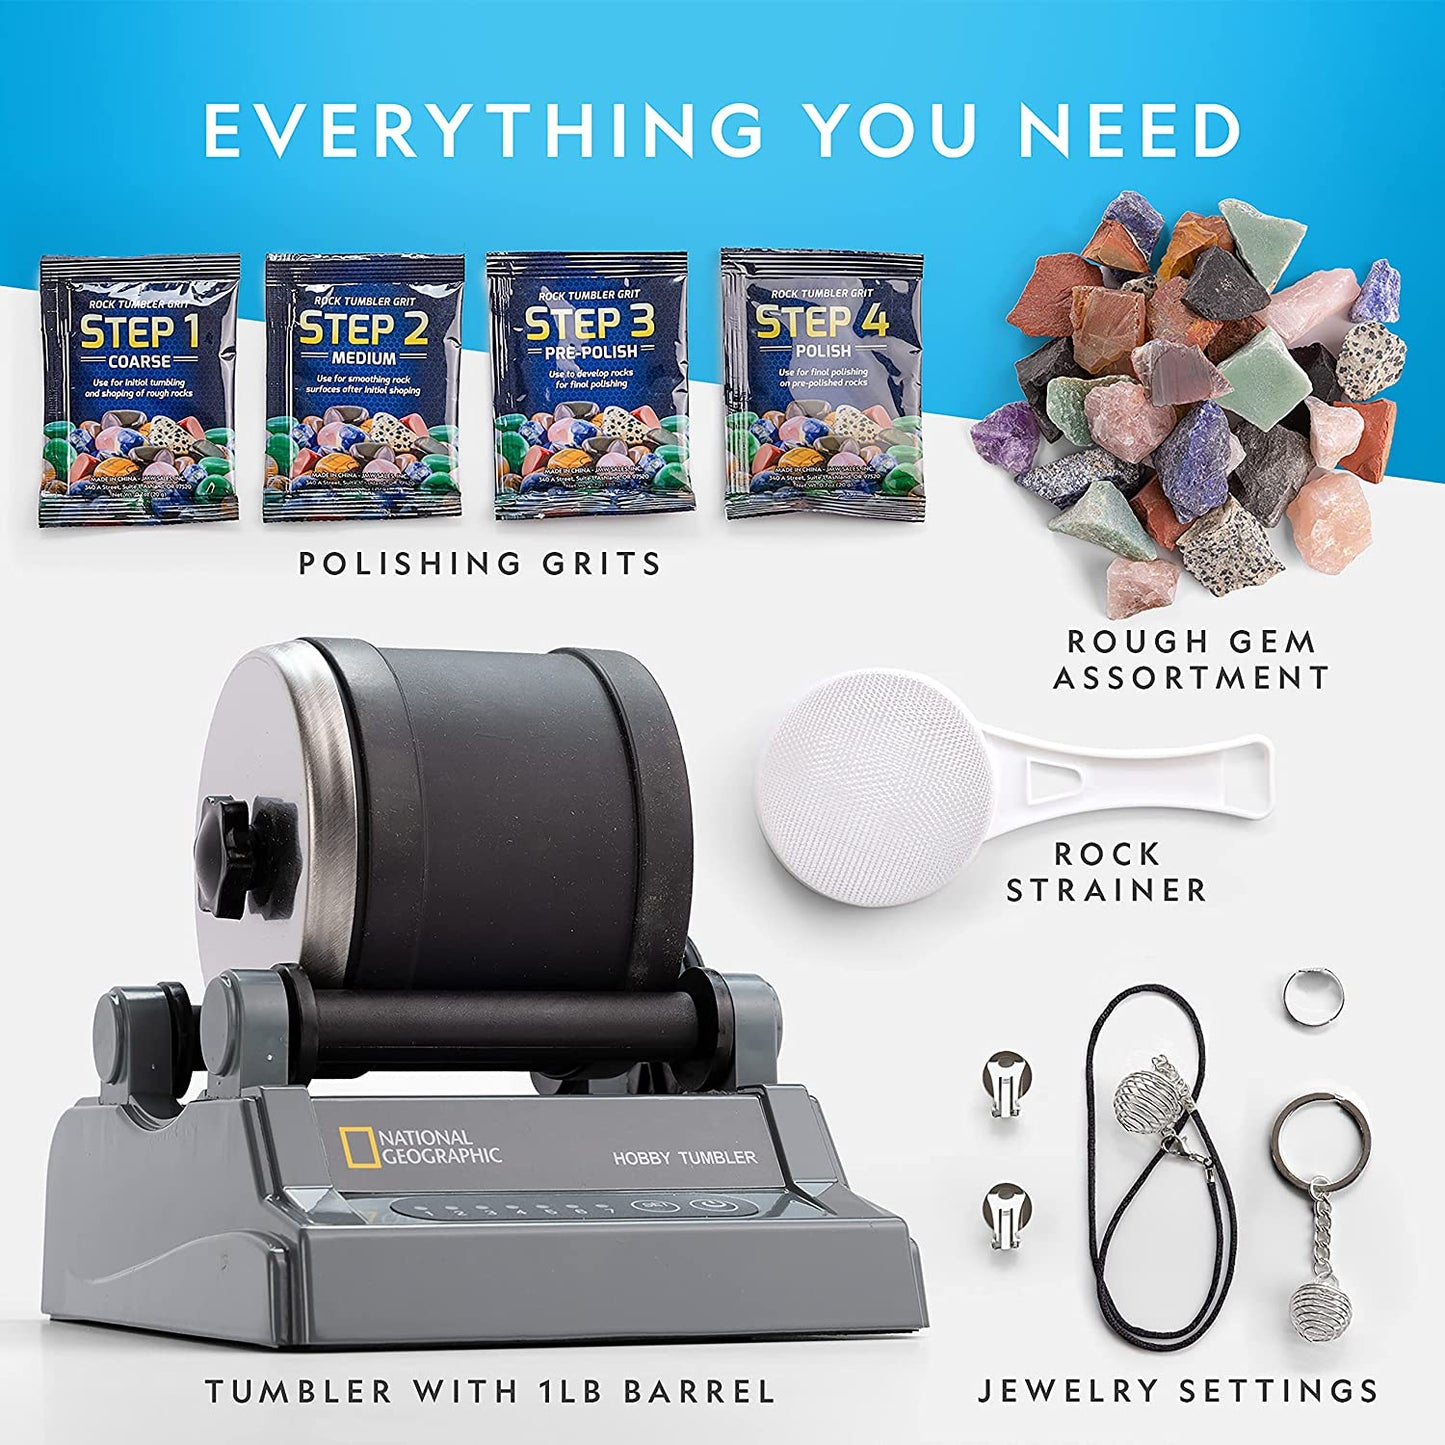 Product information for a rock tumbling kit. The text reads, 'Everything you need.' This includes polishing grits, rough gem assortment, rock strainer, tumbler with 1lb barrel and jewelry settings.